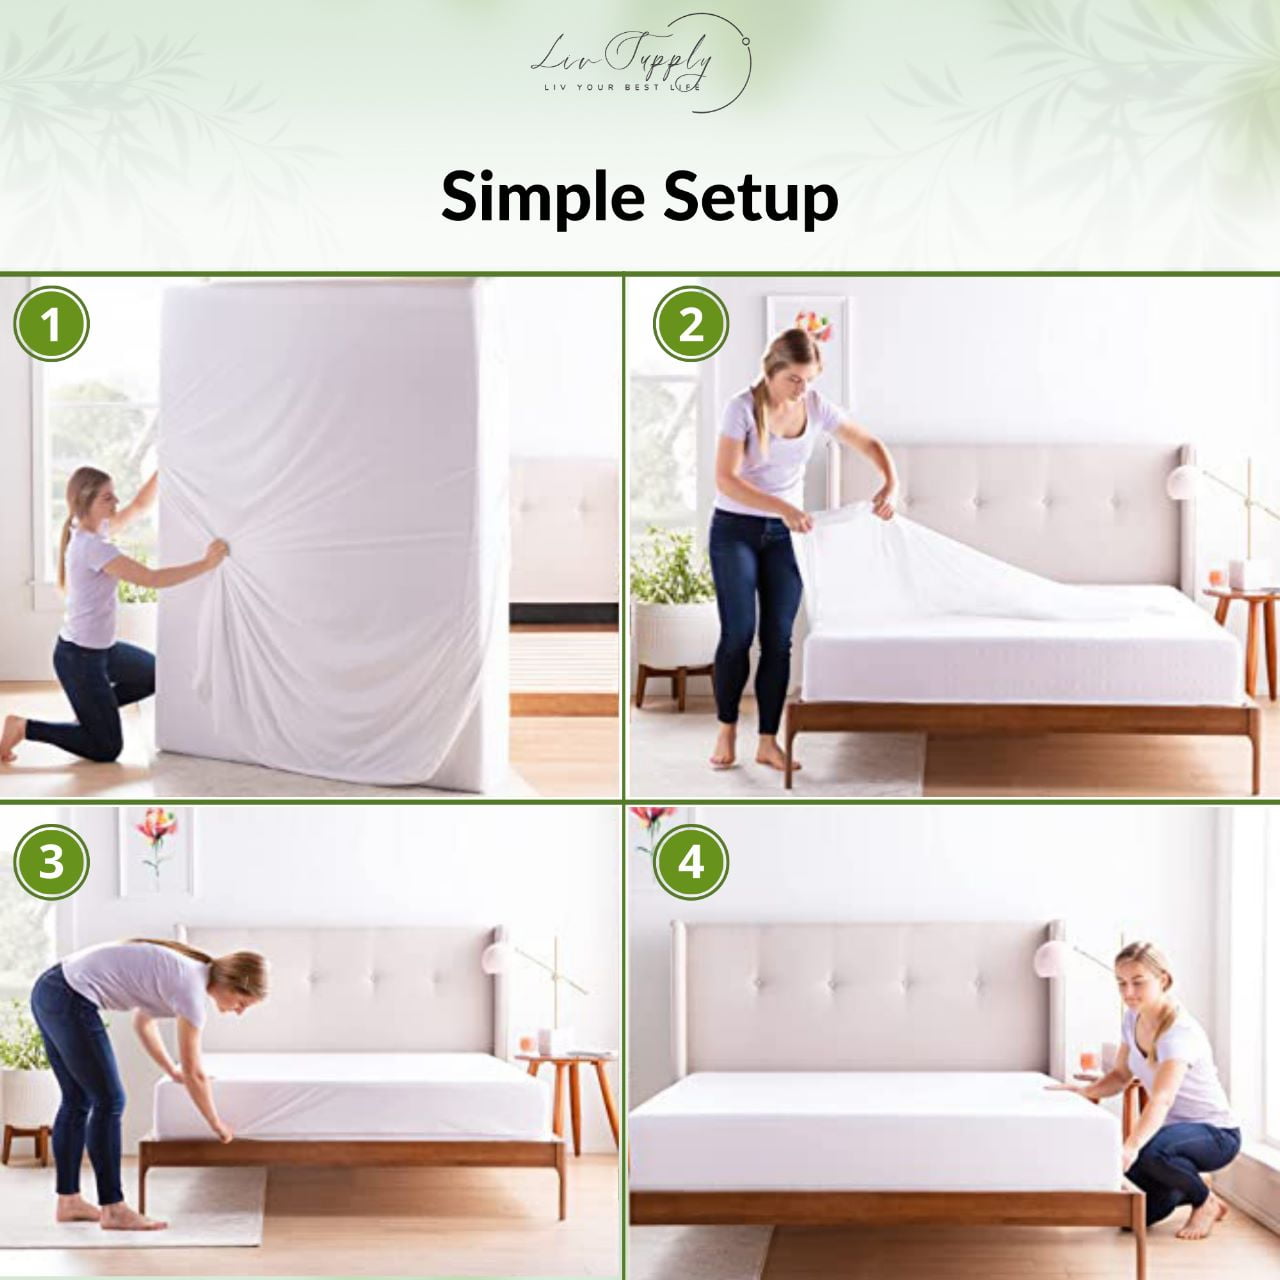 Waterproof Mattress Cover/Protector - Lifewit – Lifewitstore